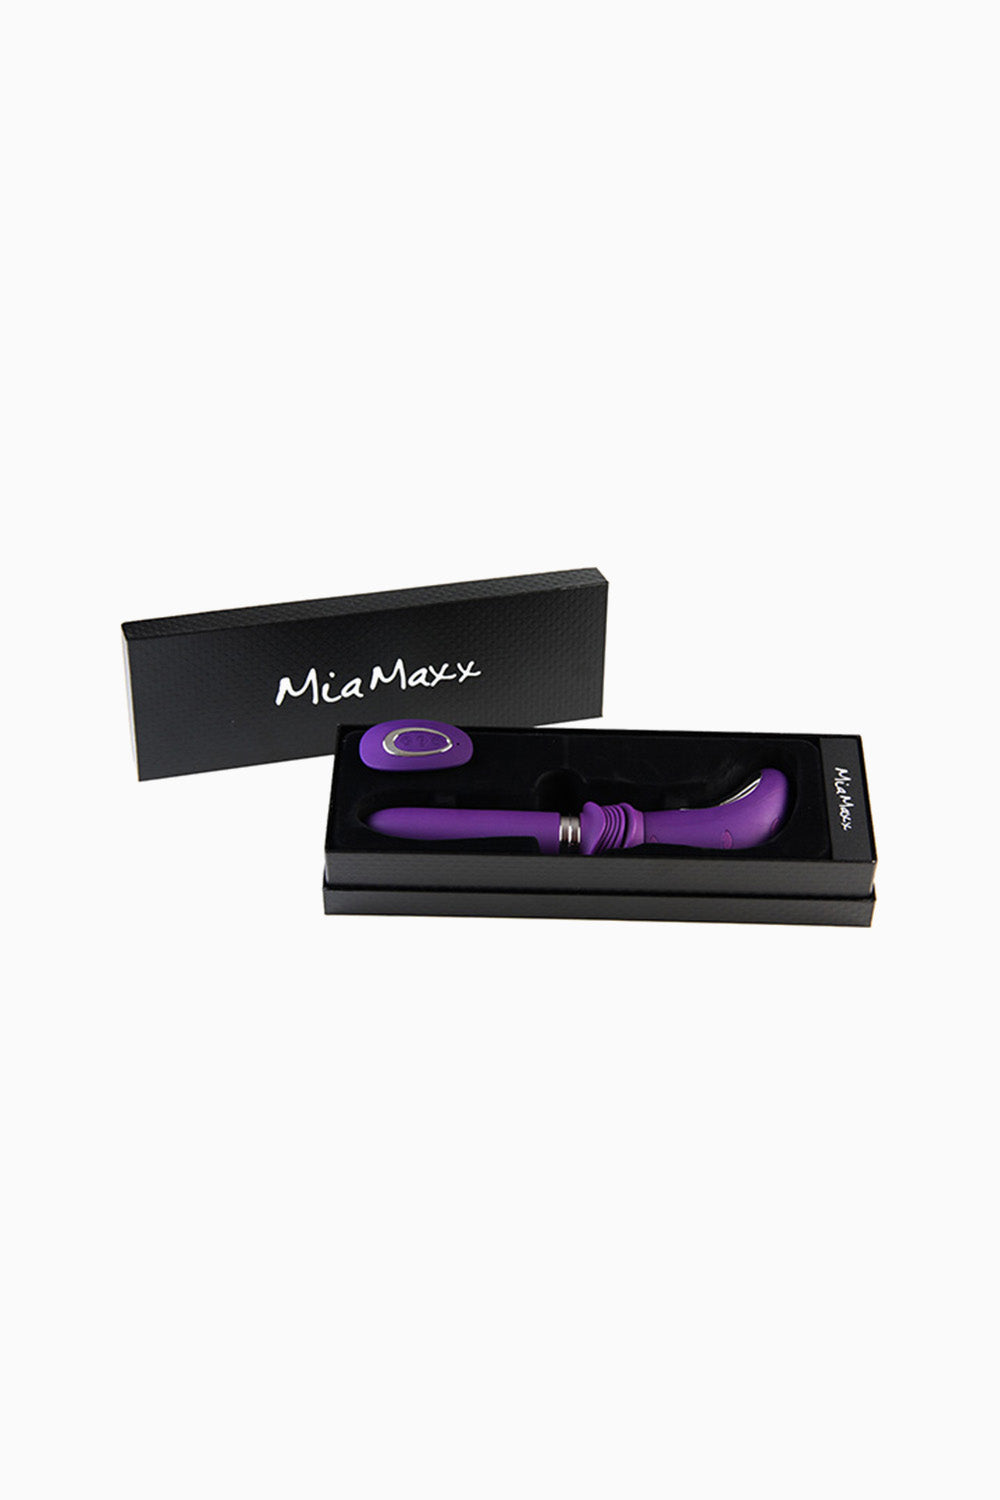 MiaMaxx Hand-Held Thruster with Remote Control Purple, 13.5 Inches